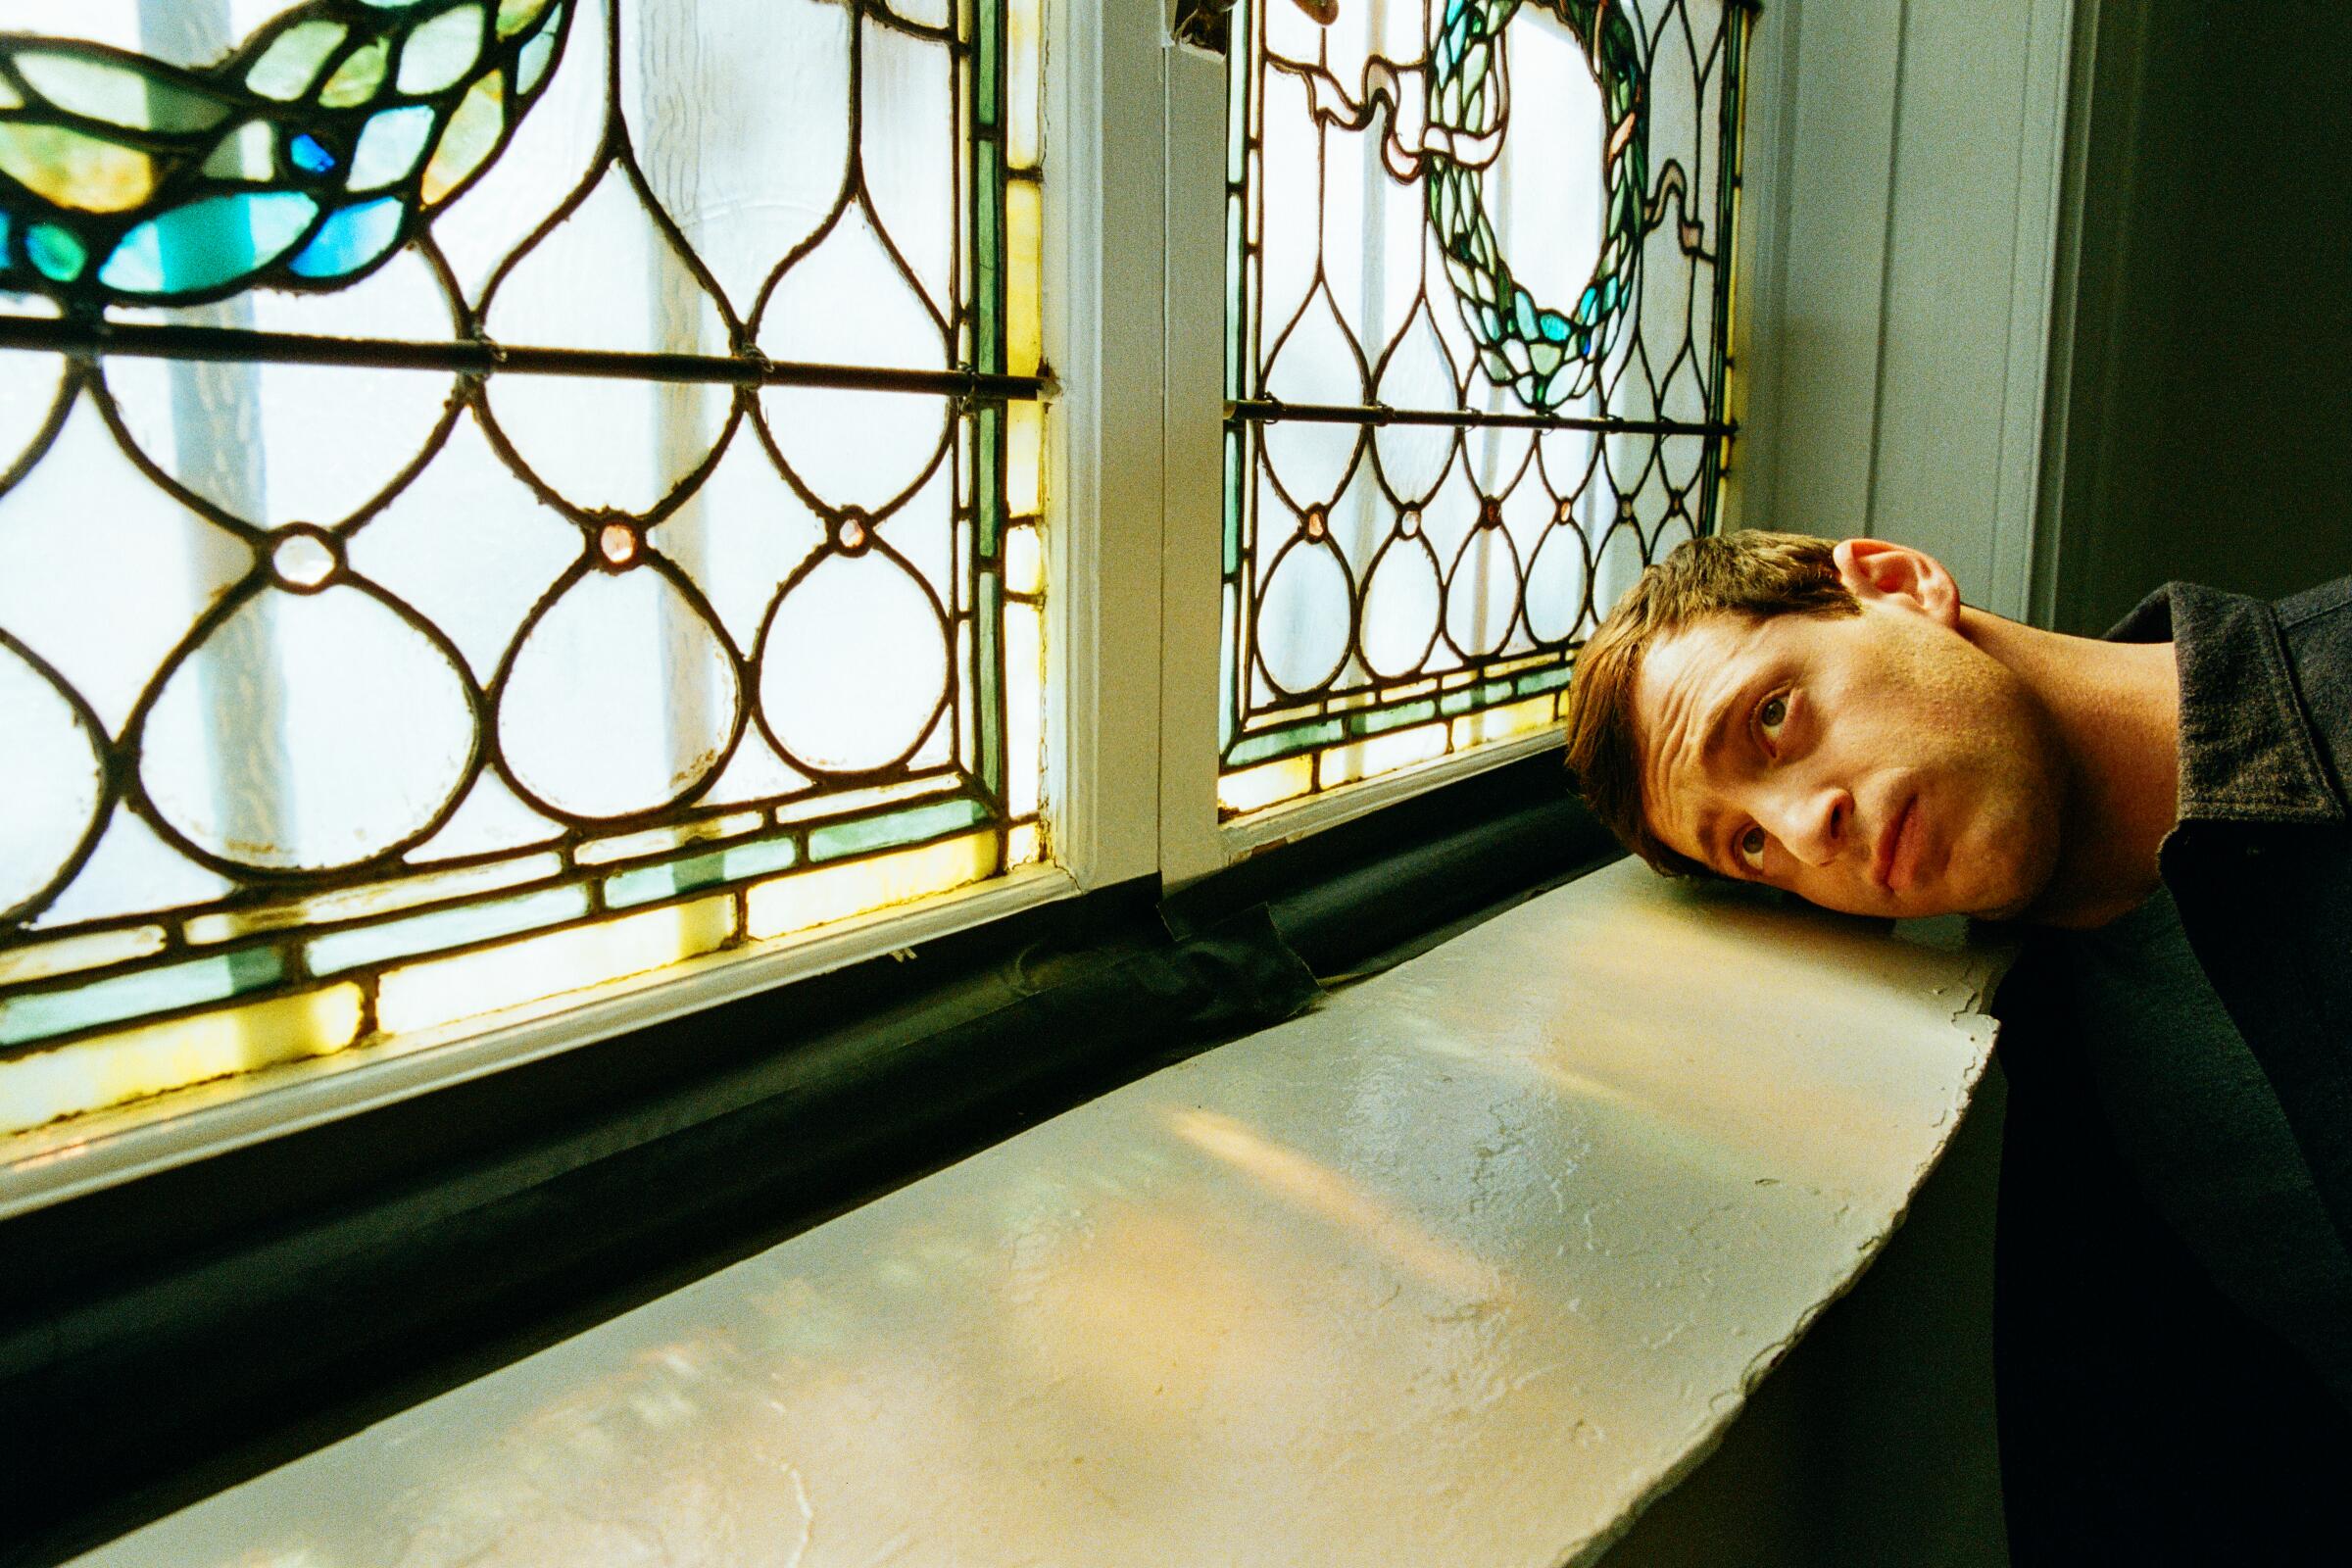 A man places his head on a windowsill.